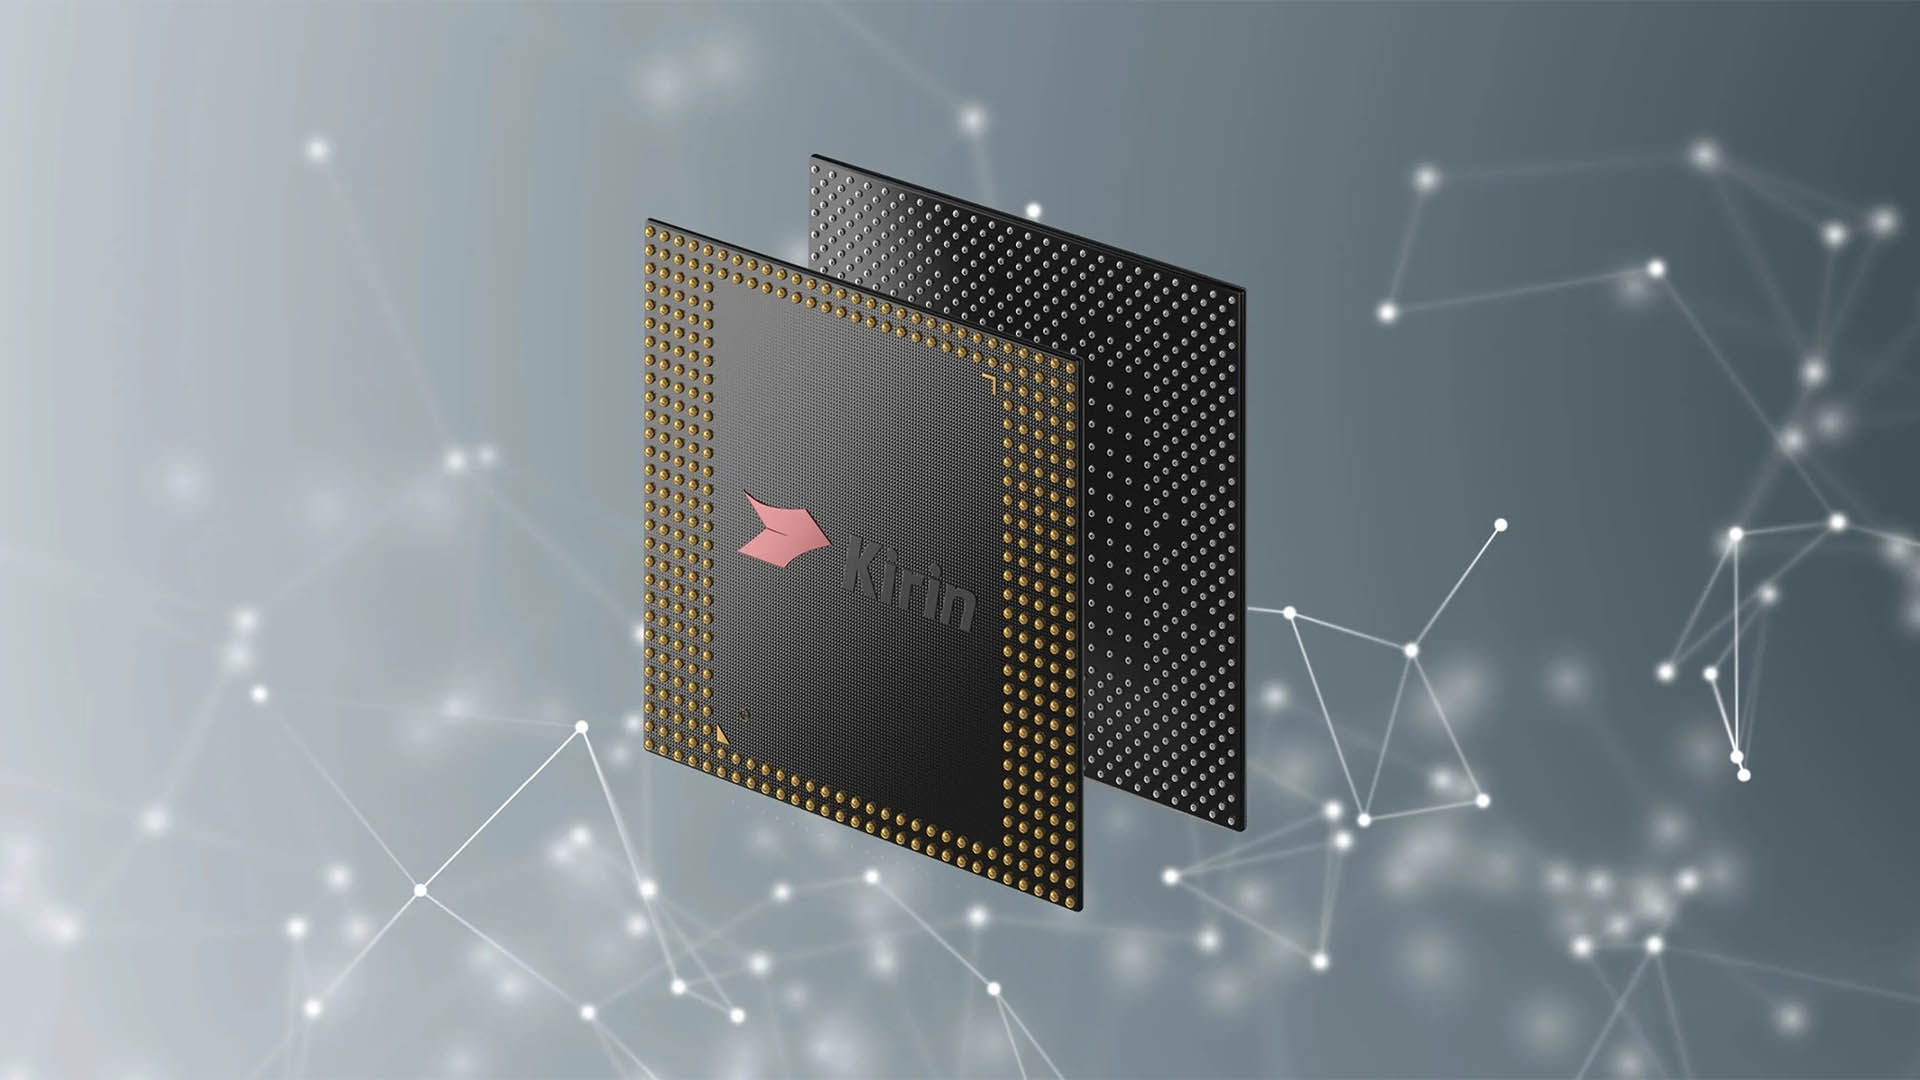 Huawei Kirin 9010 Chip Reportedly Underperforms Compared to Qualcomm's Snapdragon